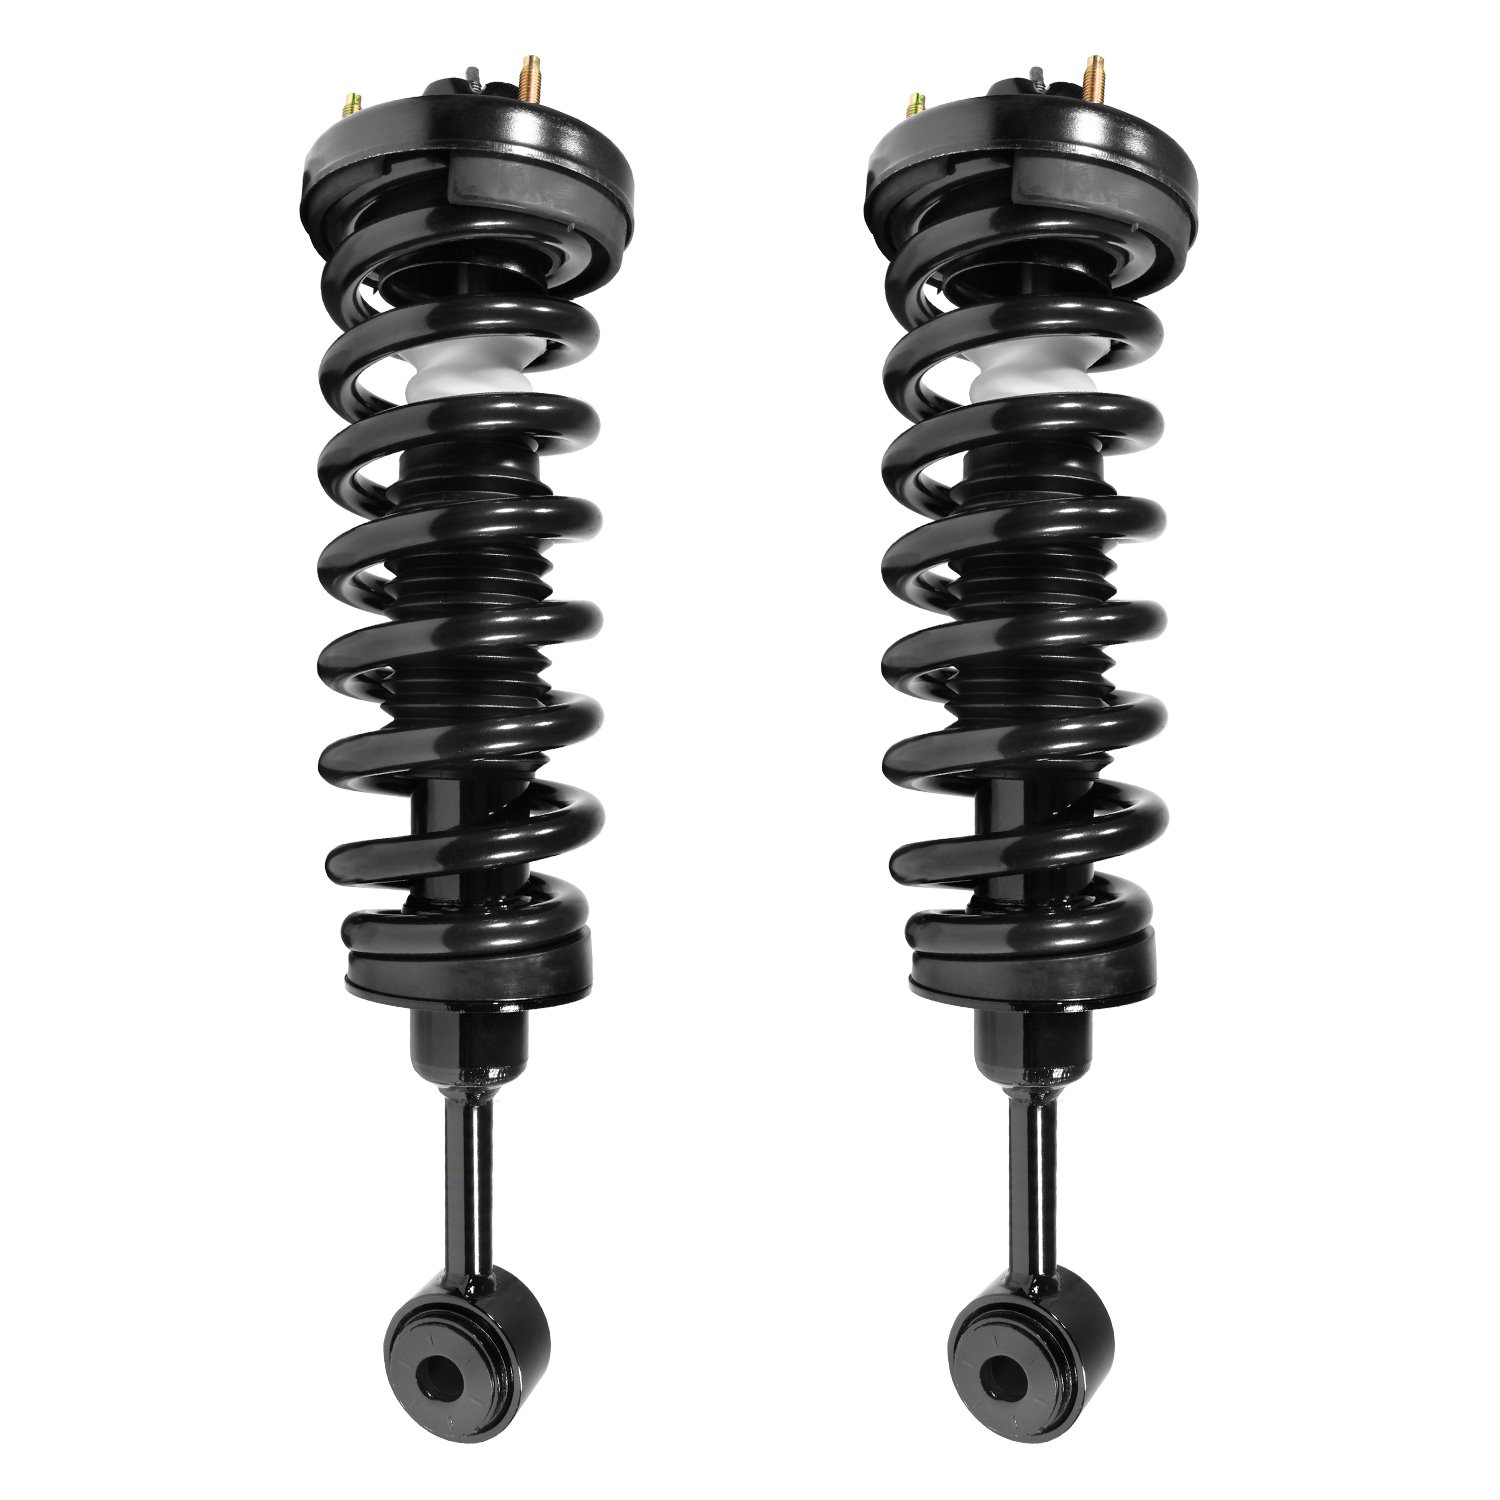 2-11380-001 Suspension Strut & Coil Spring Assembly Set Fits Select Ford Expedition, Lincoln Navigator